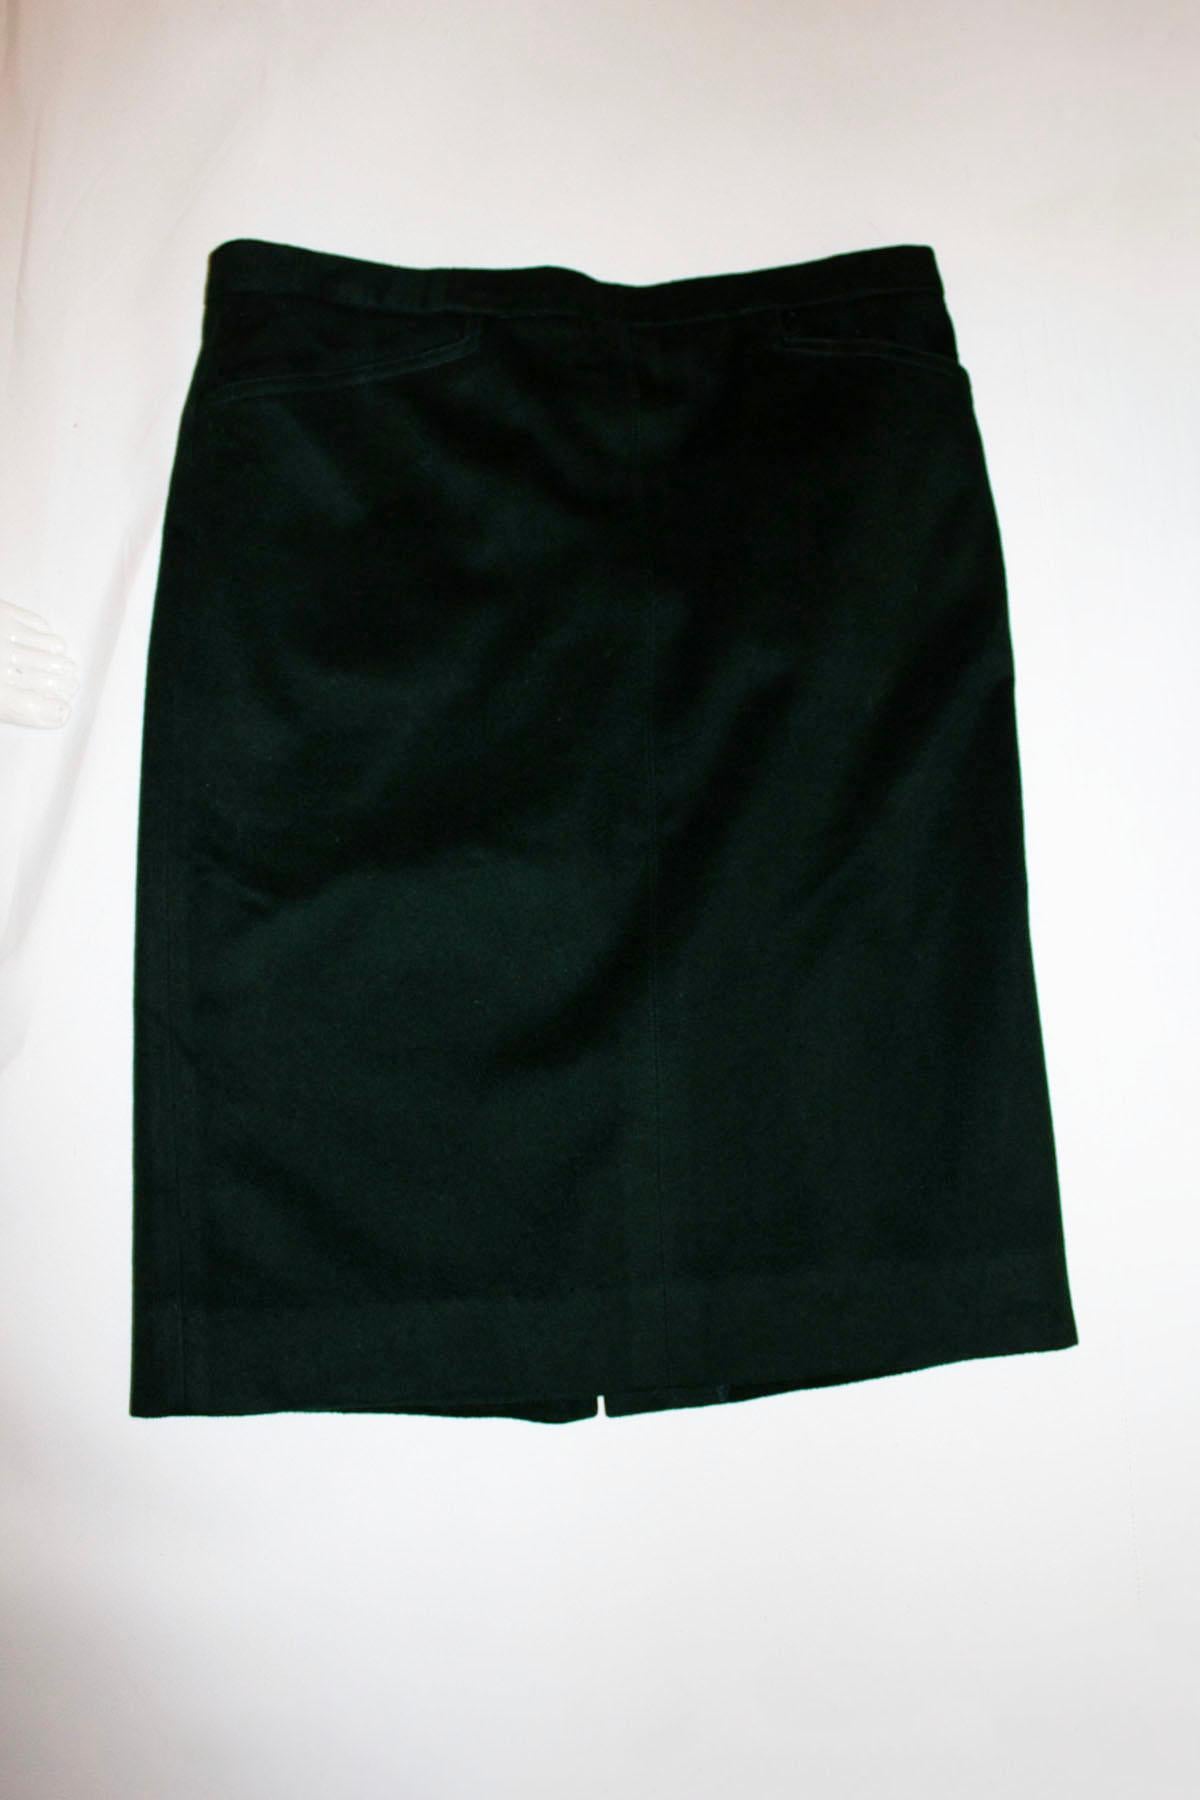 A wonderful vintage green wool skirt by Hermes, Paris.
As you would expect the fabric is of a high quality. The skirt has two pockets and is fully lined. 
Size 40, Measurements: waist 34''.  length 25''